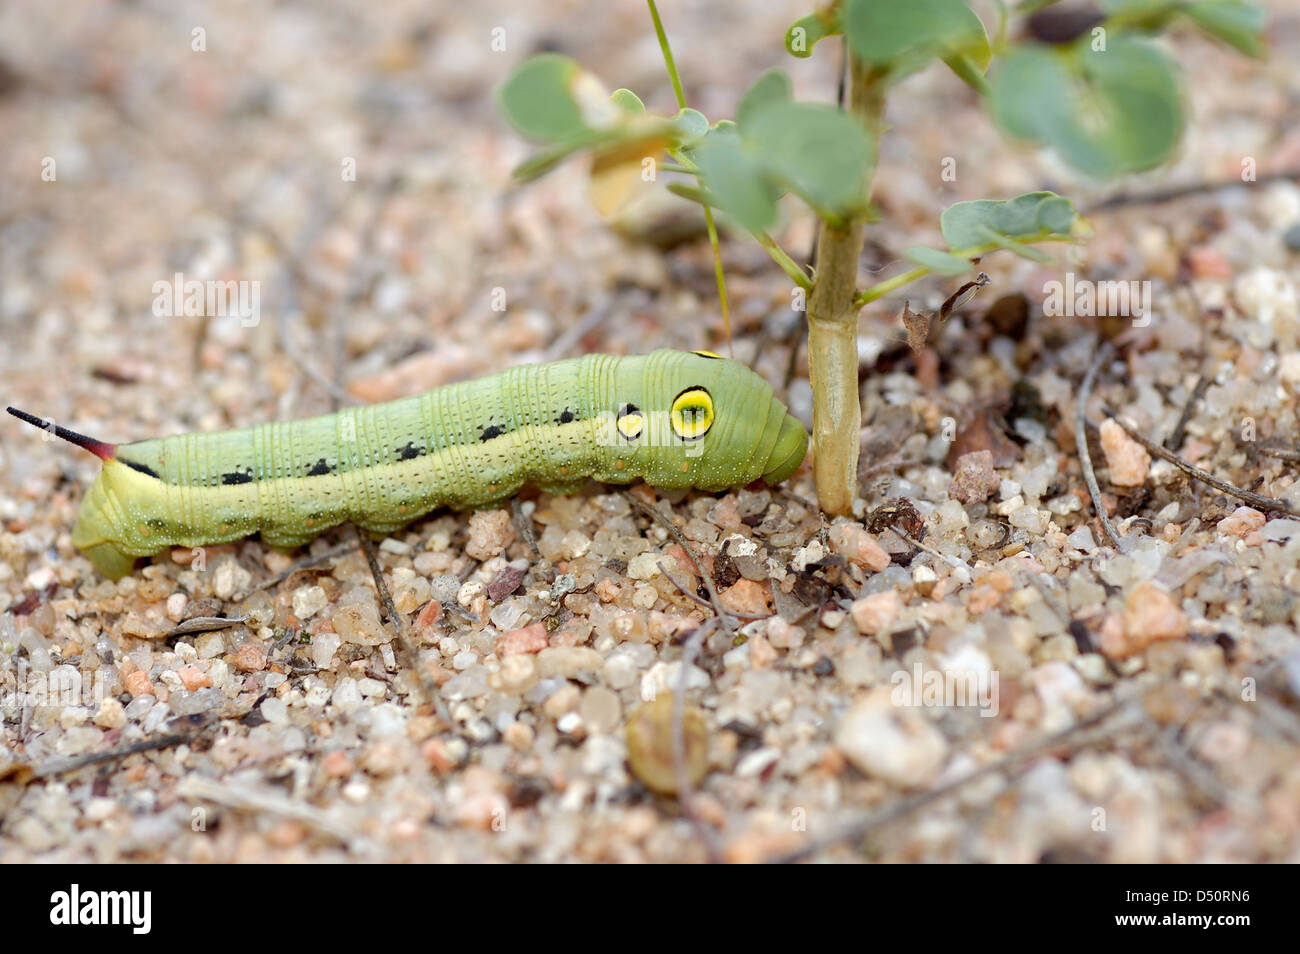 Silver-striped hawk moth caterpillar (Hippotion celerio: Sphingidae) resembling a small snake, Namibia Stock Photo